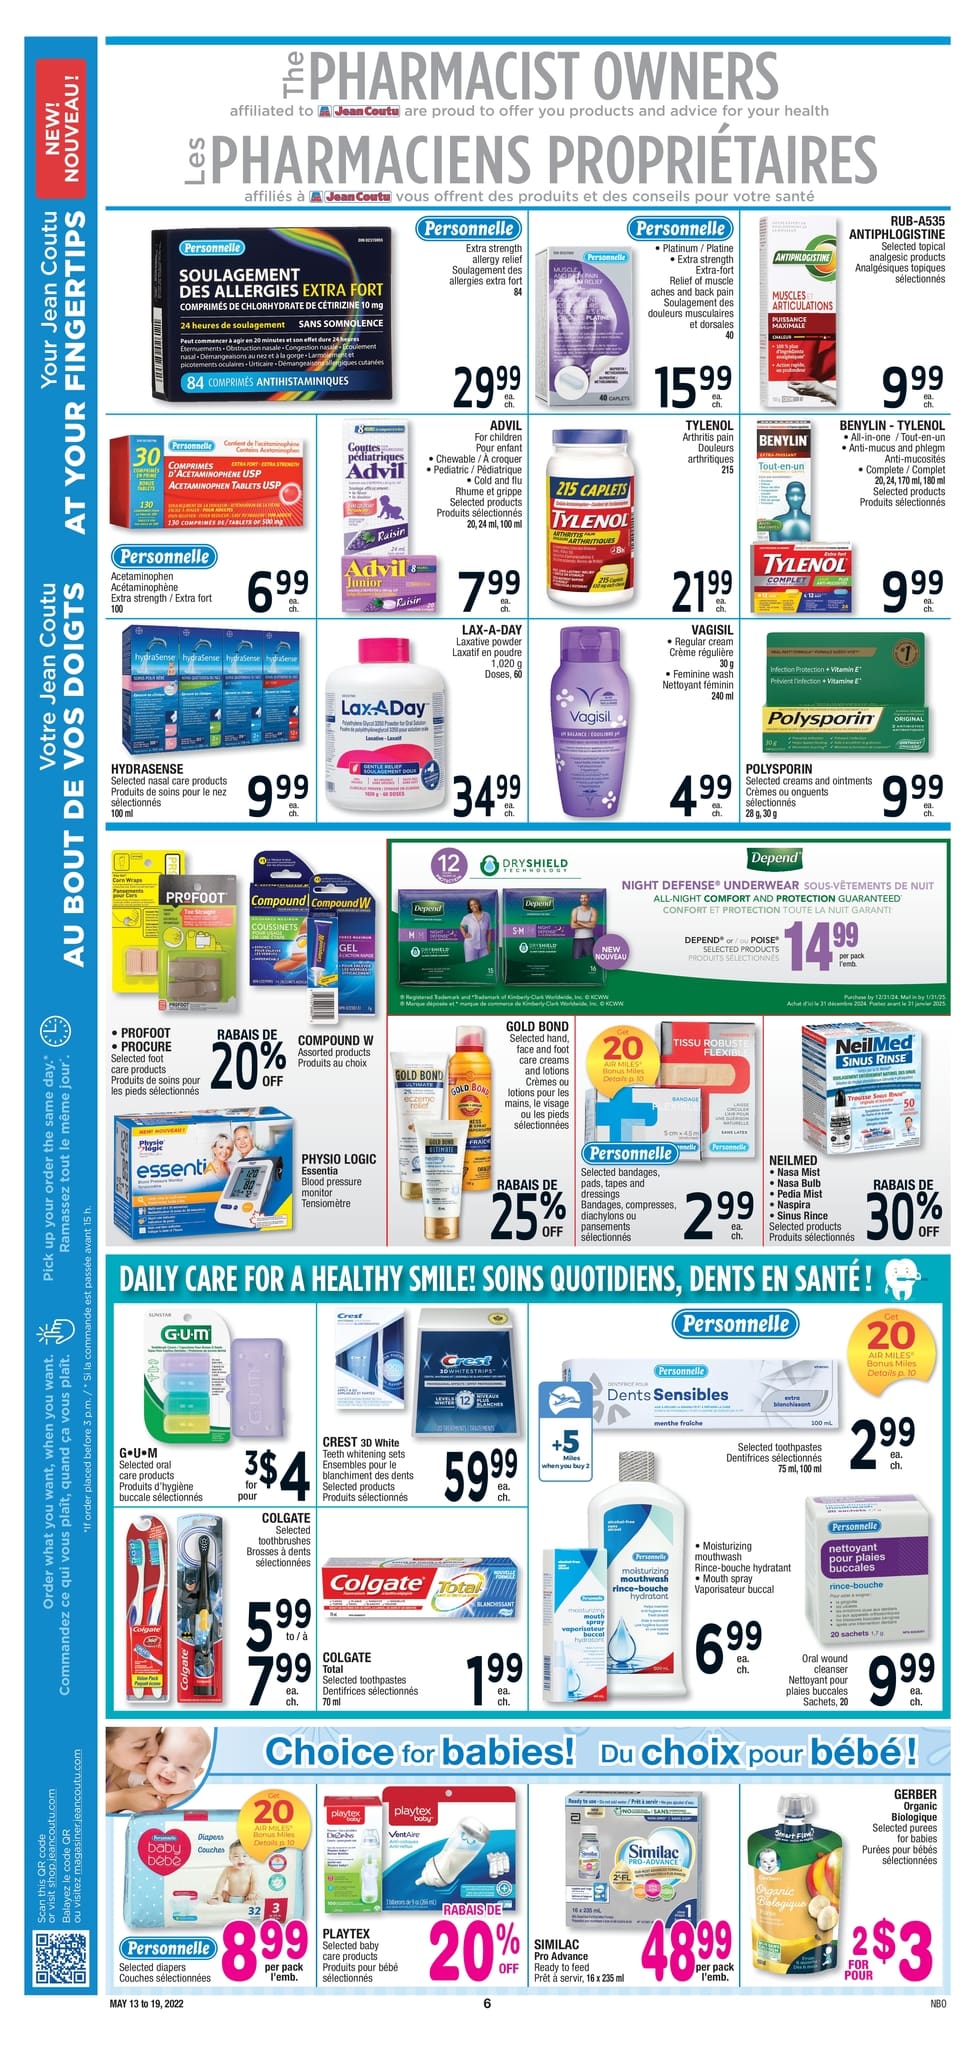 Jean Coutu - Weekly Flyer Specials - Page 6